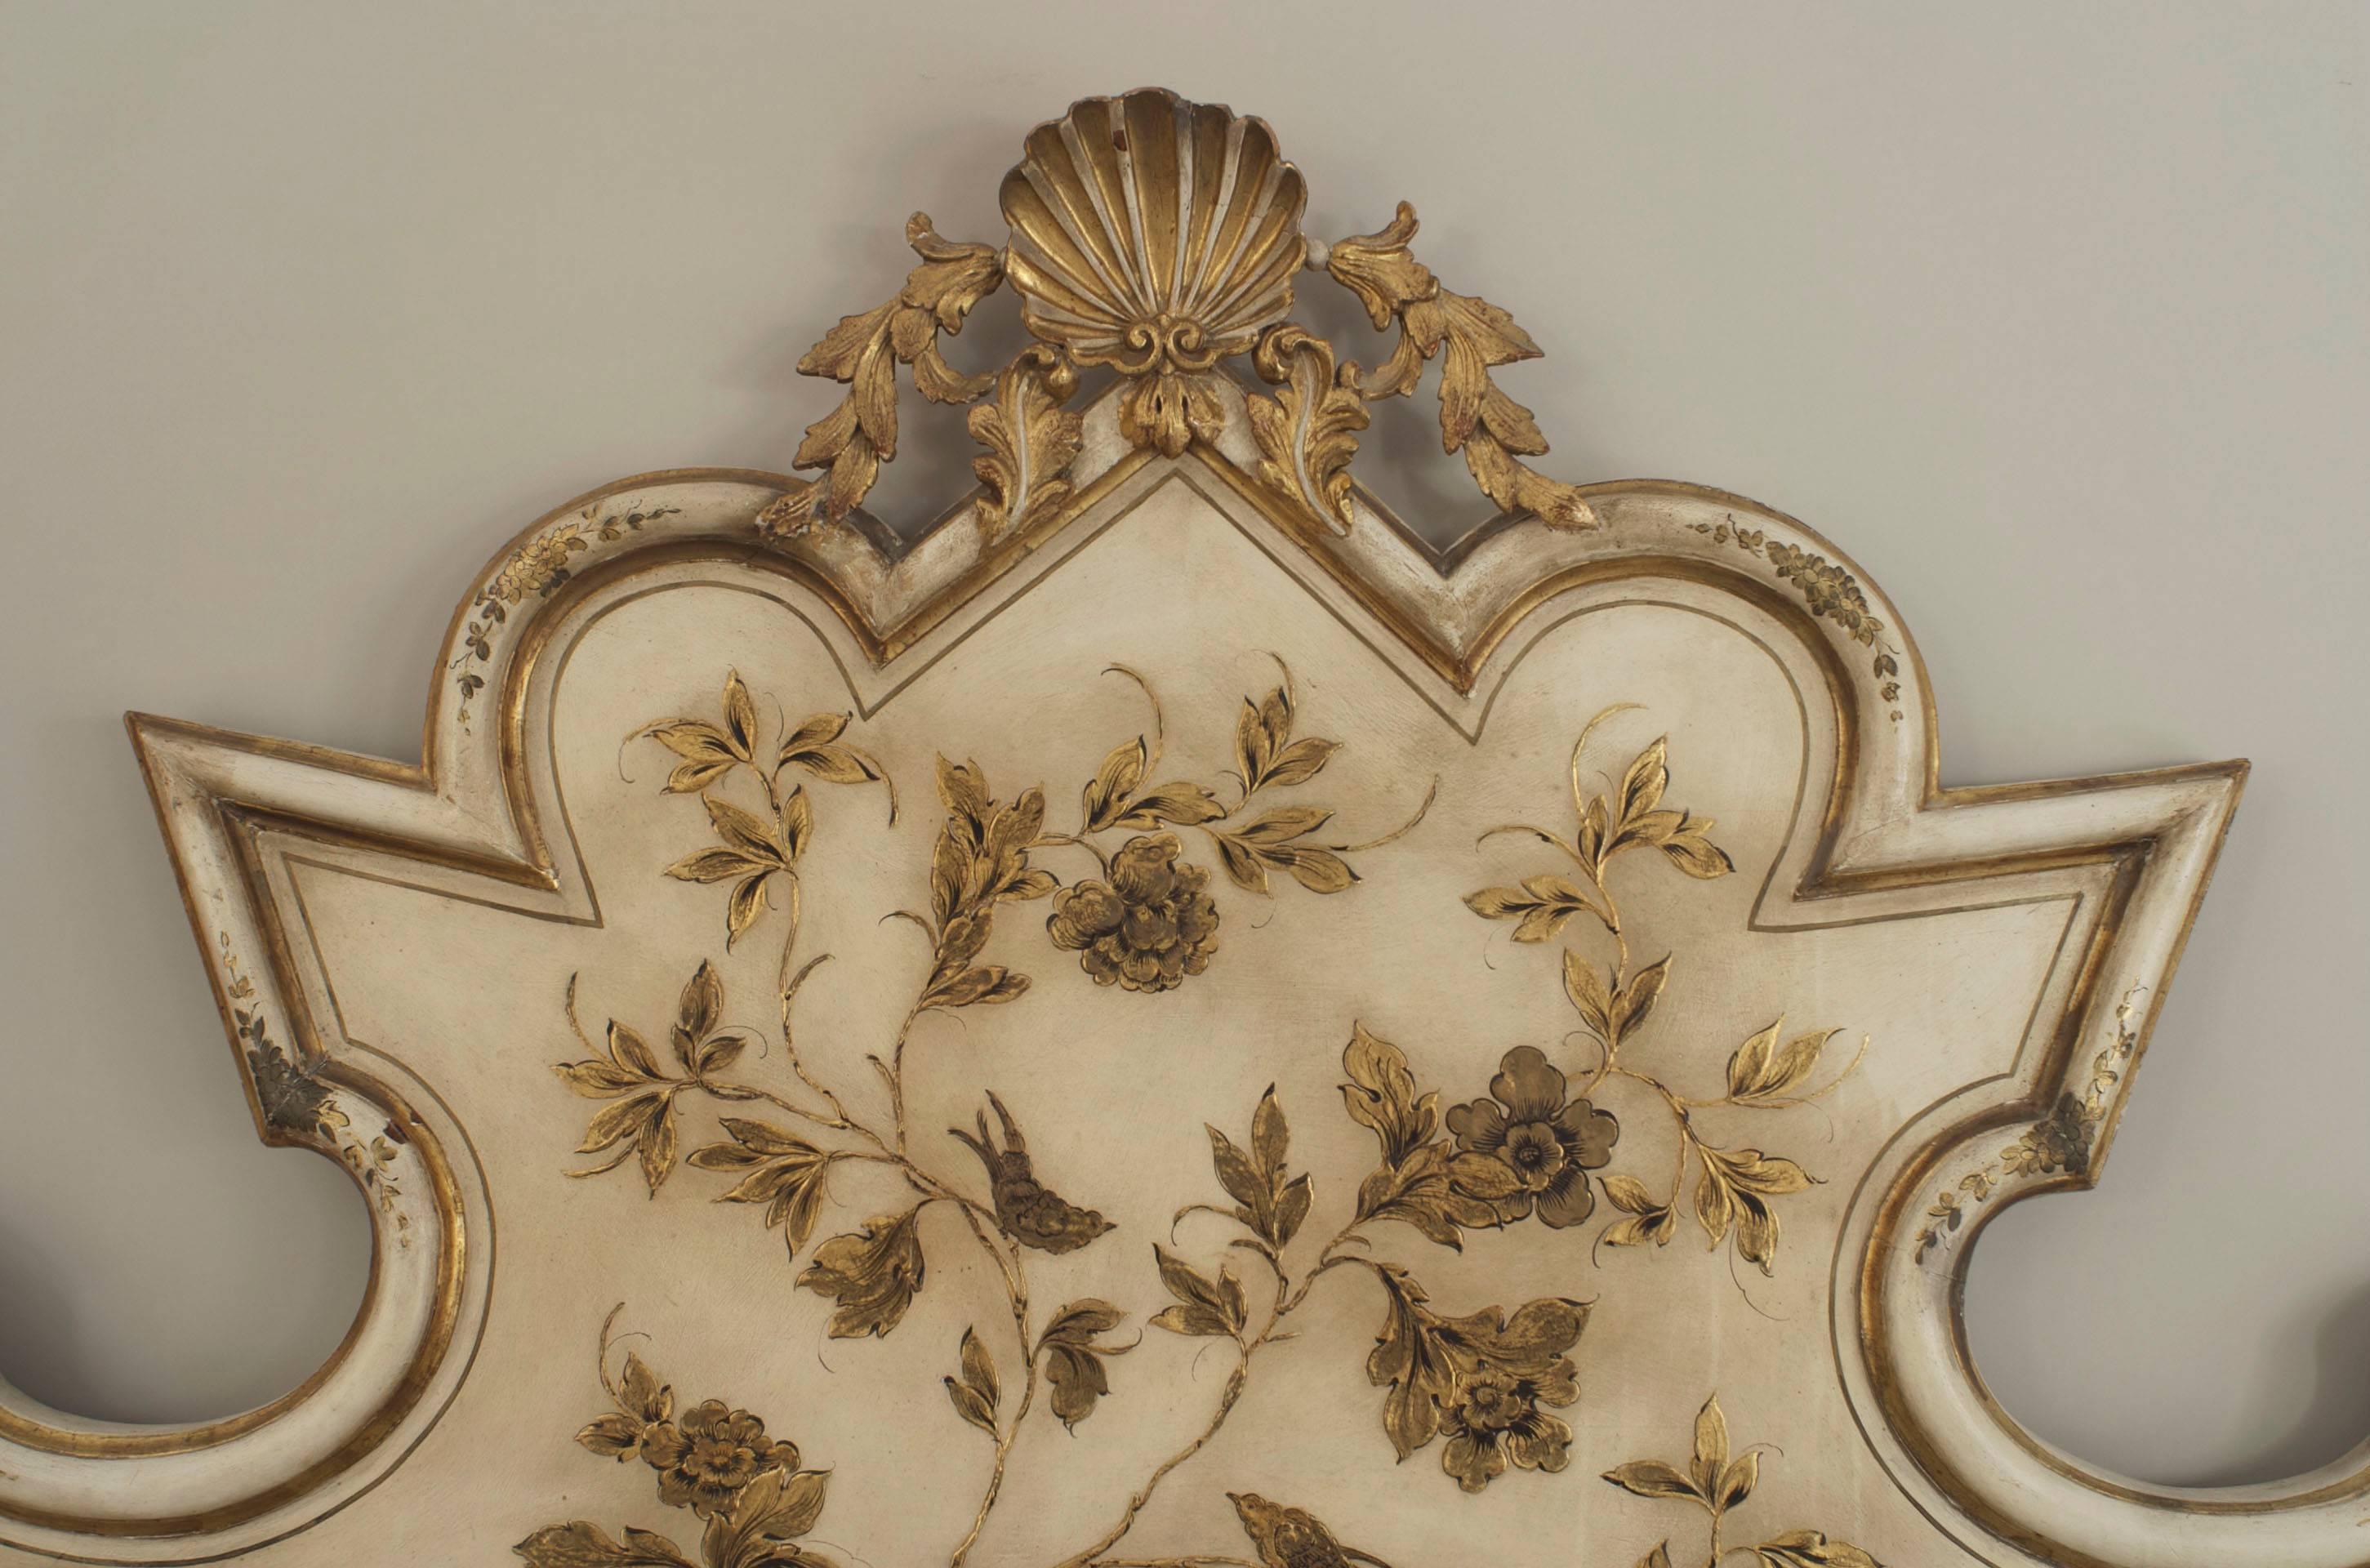 Italian Venetian-style (1950s) antique cream painted shaped headboard with gilt floral leaf decoration with a gilt carved shell pediment top (includes: headboard only)
